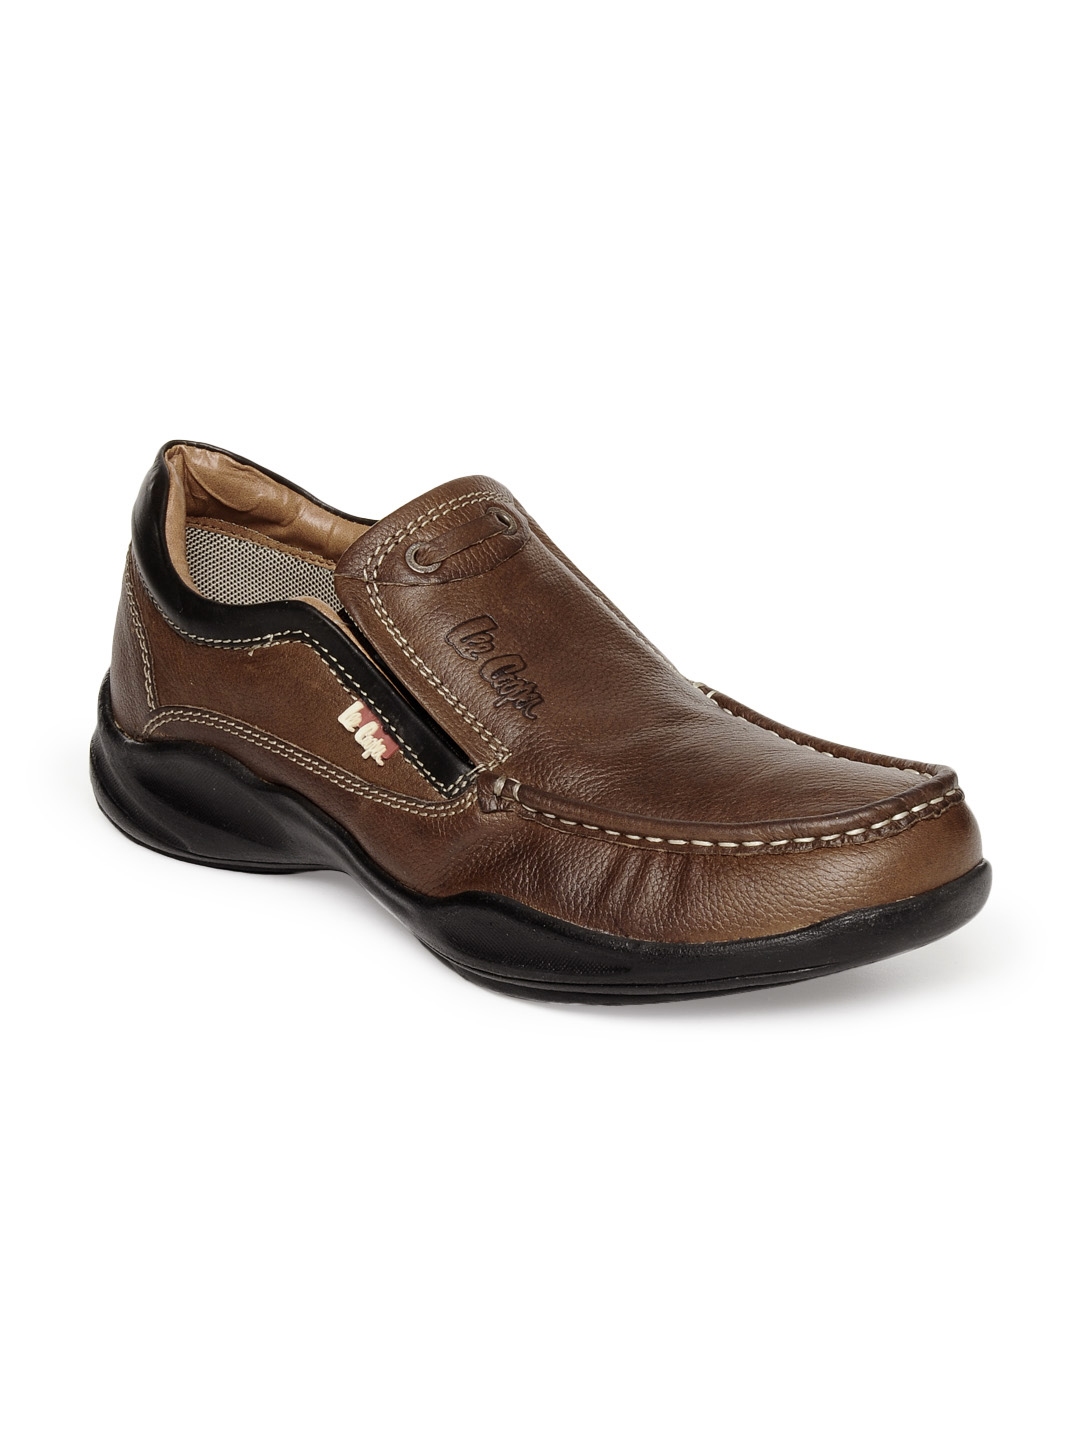 Buy Lee Cooper Men Brown Shoes - Casual Shoes for Men 92908 | Myntra